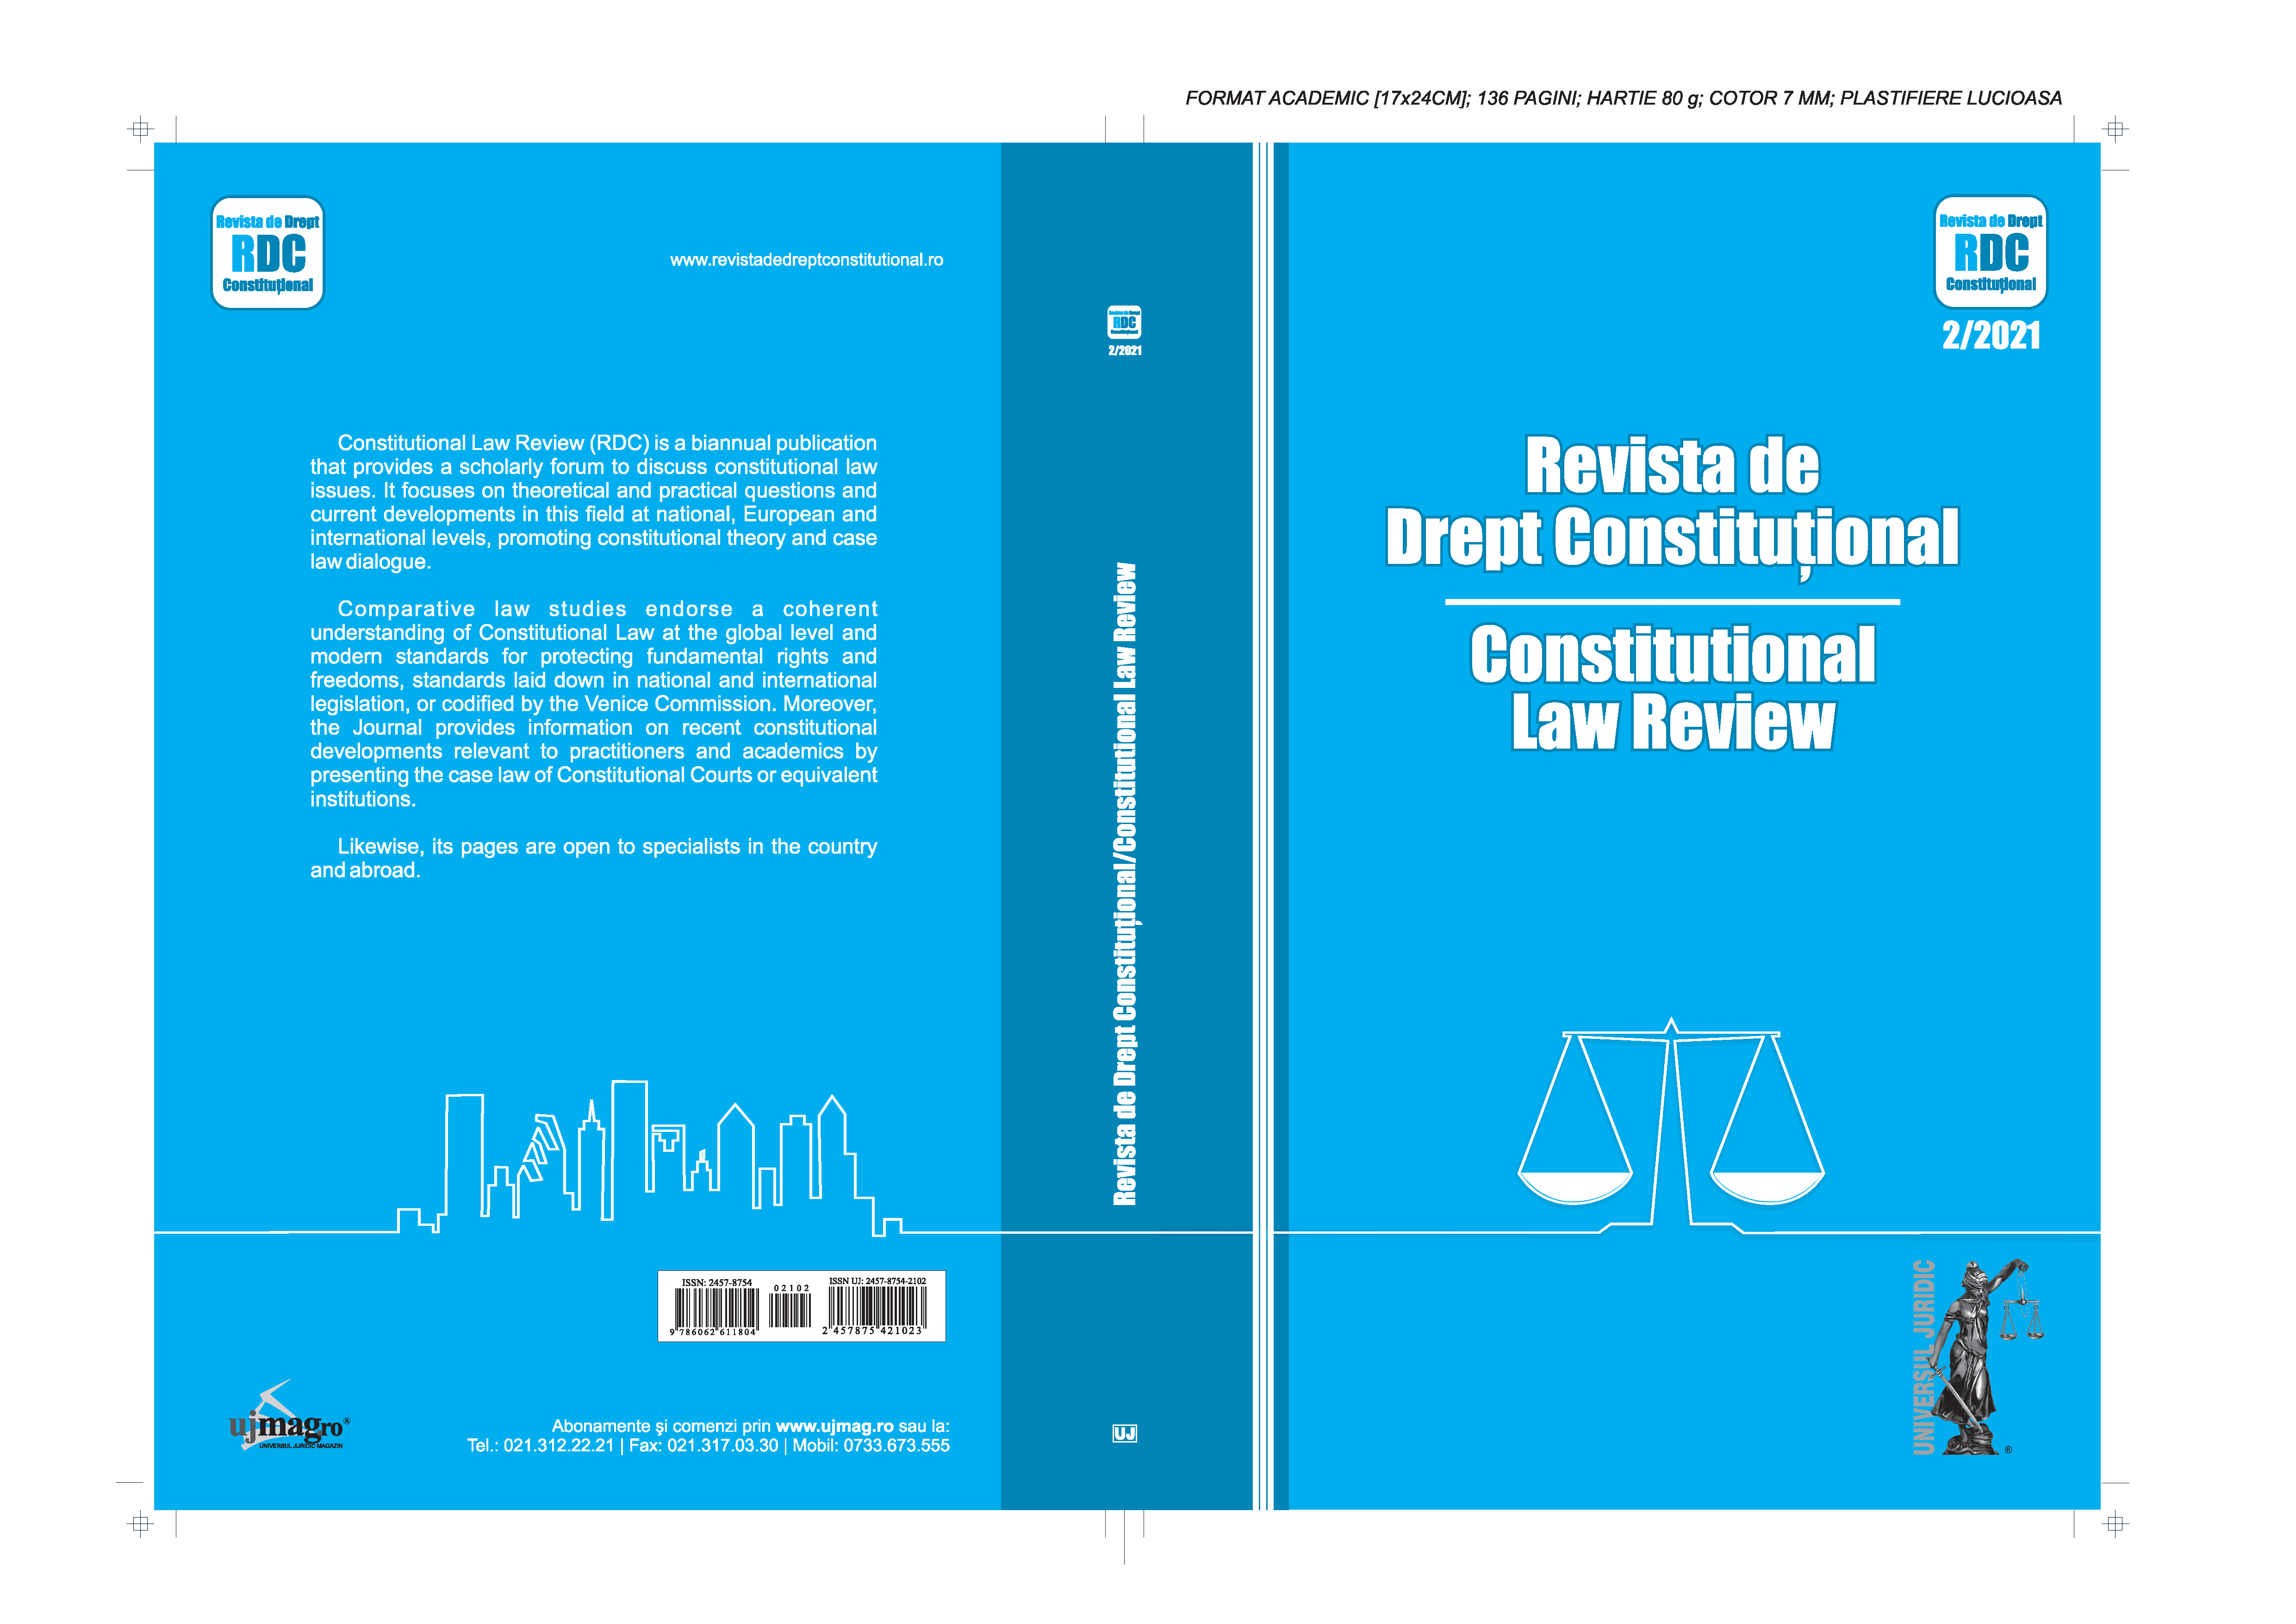 A comparative study of separation of powers – an aspect of constitutionalism